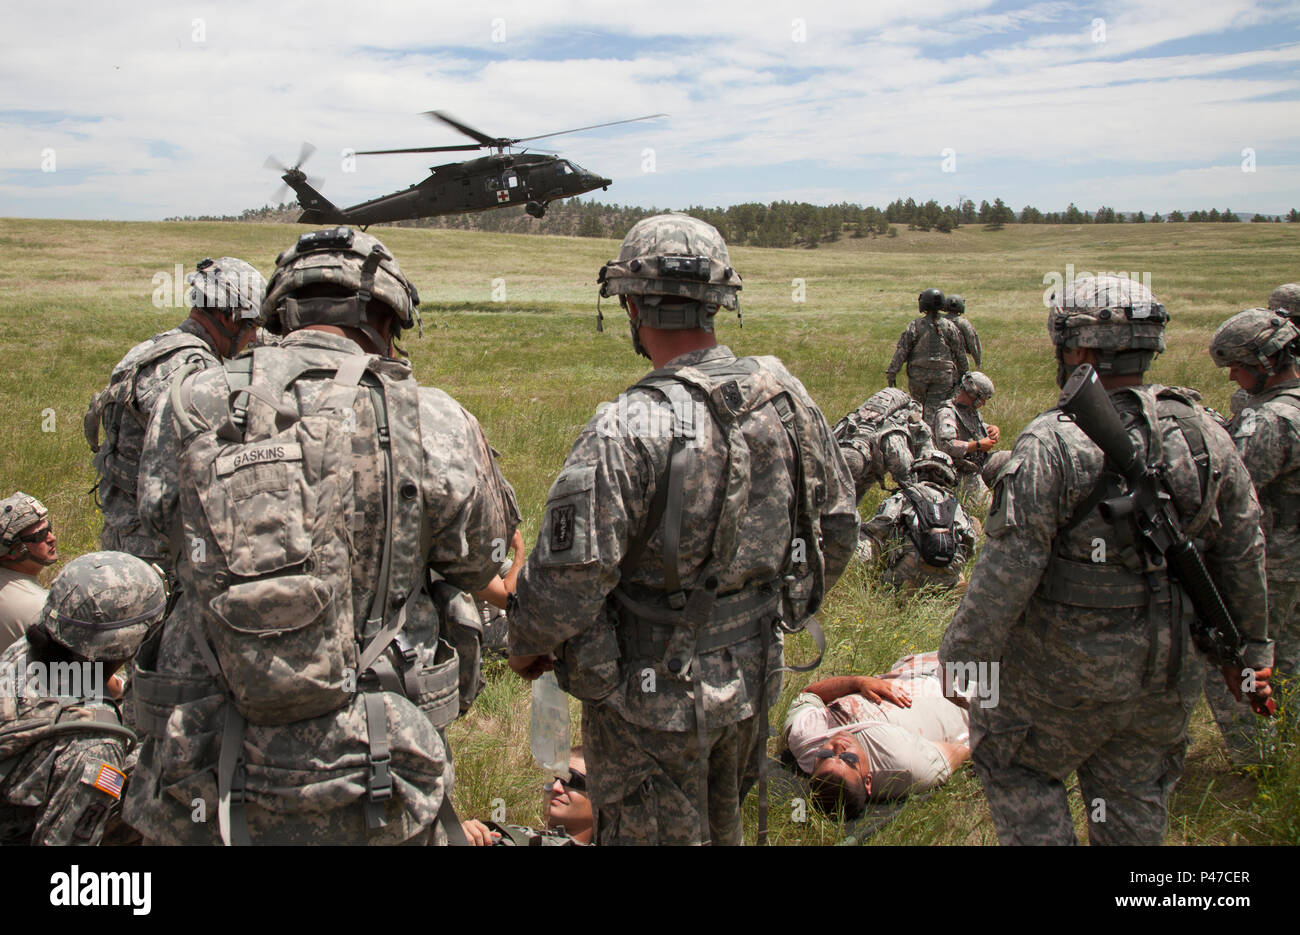 U.S. Army Soldiers of the 396th Medical Company (Ground Ambulance) and the 235th Military Police Company prepare wounded soldiers for a medical evacuation by a HH-60M Blackhawk helicopter during a mass casualty training lane for the Golden Coyote exercise, in Camp Guernsey, Wyo., June 18, 2016.  The Golden Coyote exercise is a three-phase, scenario-driven exercise conducted in the Black Hills of South Dakota and Wyoming, which enables commanders to focus on mission essential task requirements, warrior tasks and battle drills. (U.S. Army photo by Spc. Chenyang Liu/Not Released) Stock Photo